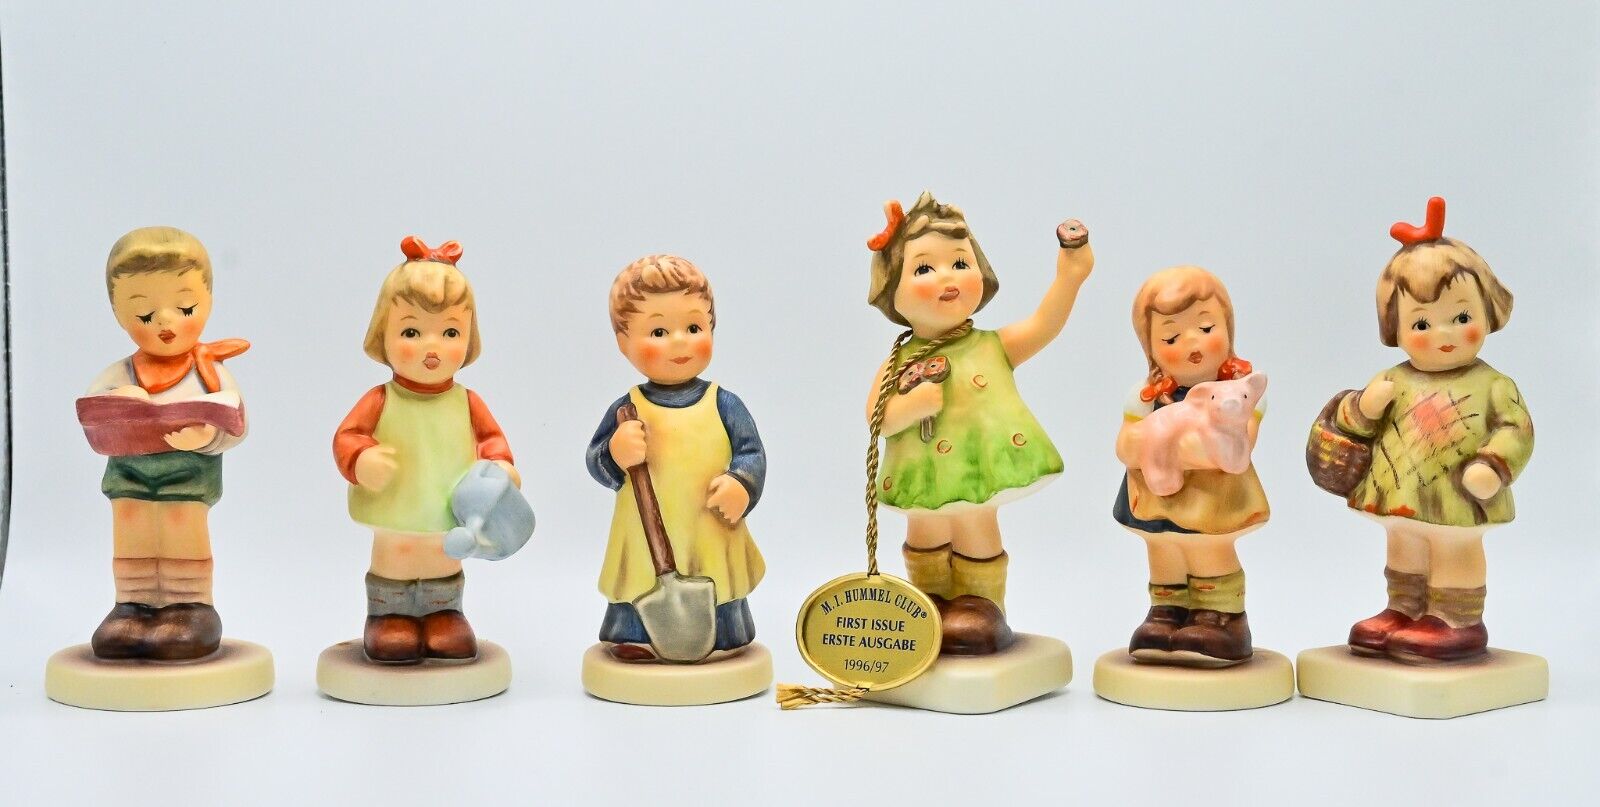 Hummel Collector's Club small figurines, group of 6